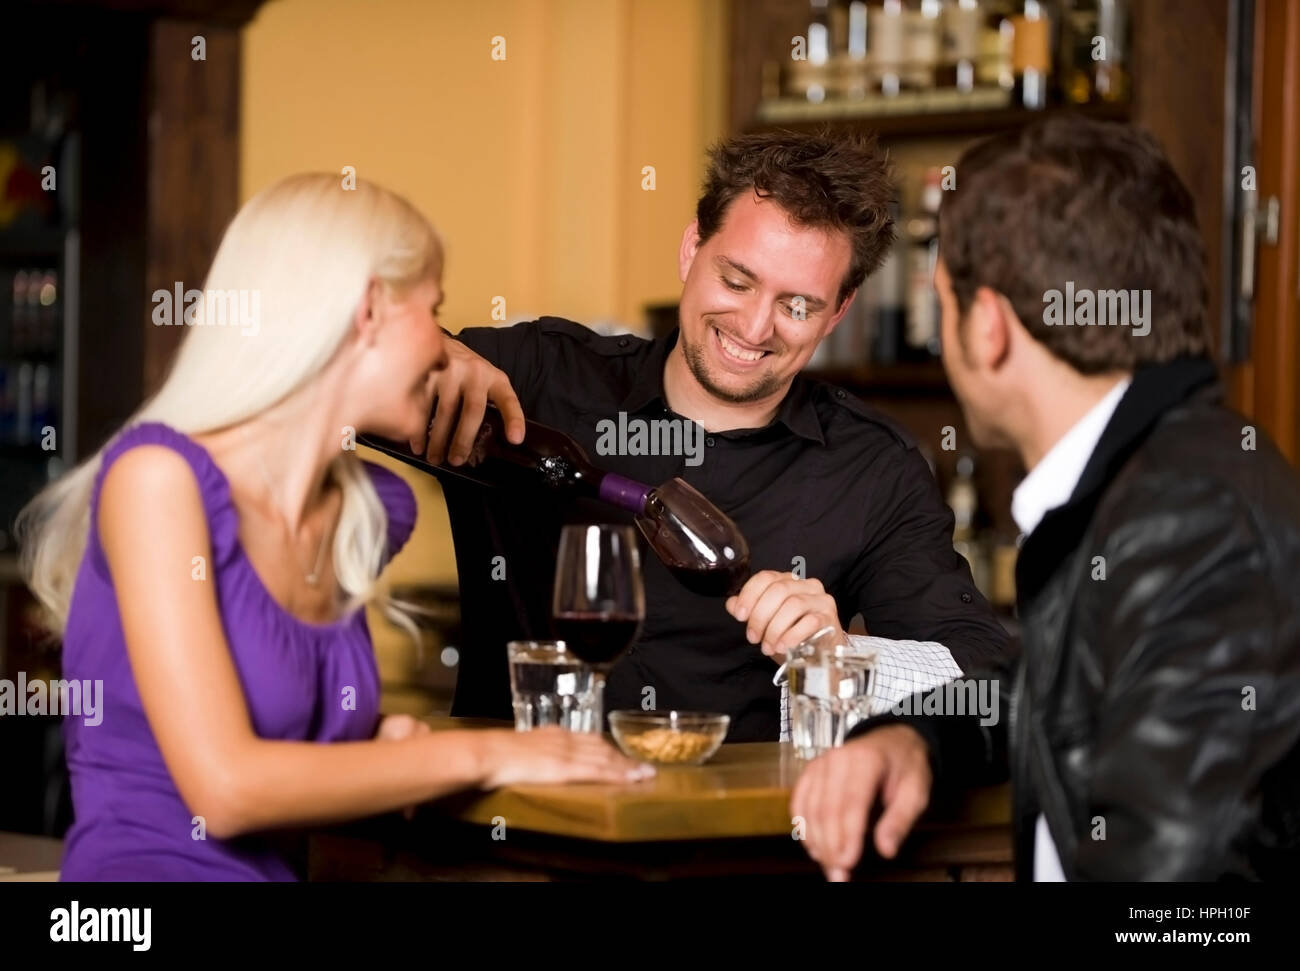 Model released , Paar und Kellner an der Theke - couple and waiter at the bar Stock Photo